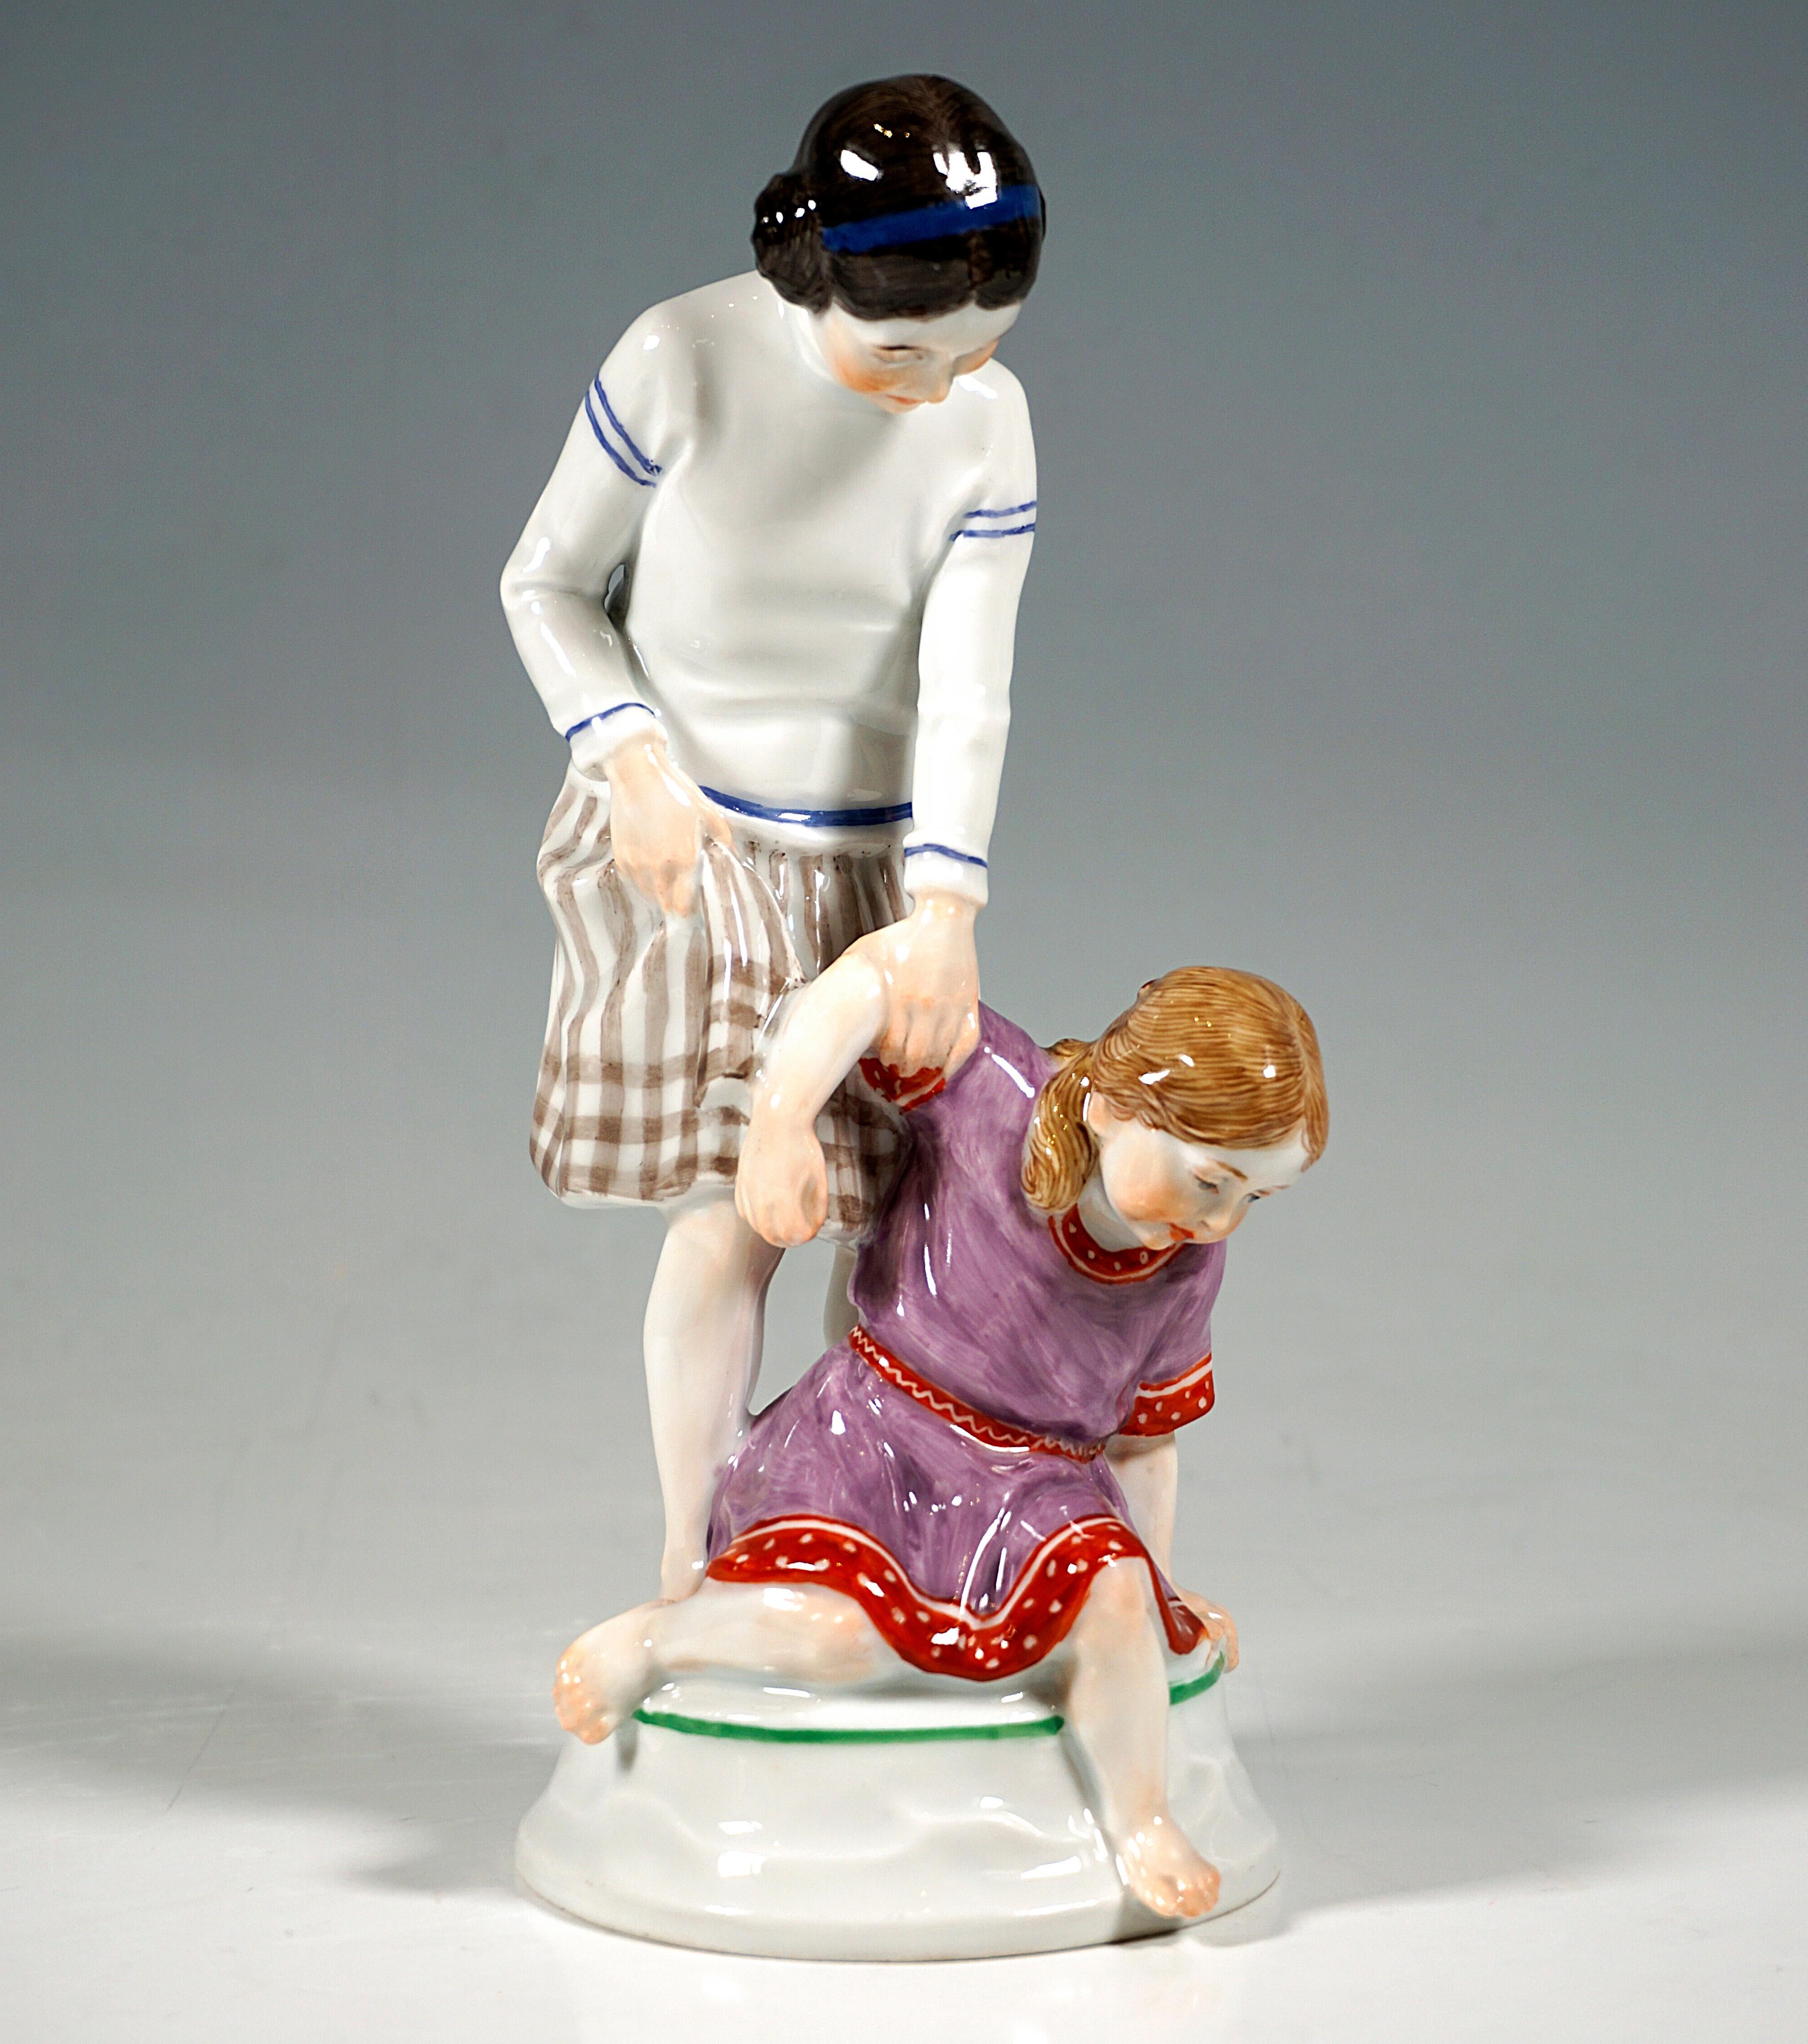 Extremely rare Meissen Art Nouveau porcelain group:
Two barefoot girls in summer clothes, the older one in a striped skirt and white and blue long-sleeved bodice, her hair pinned up in two side buns, grabbing the arm of the younger child in a red